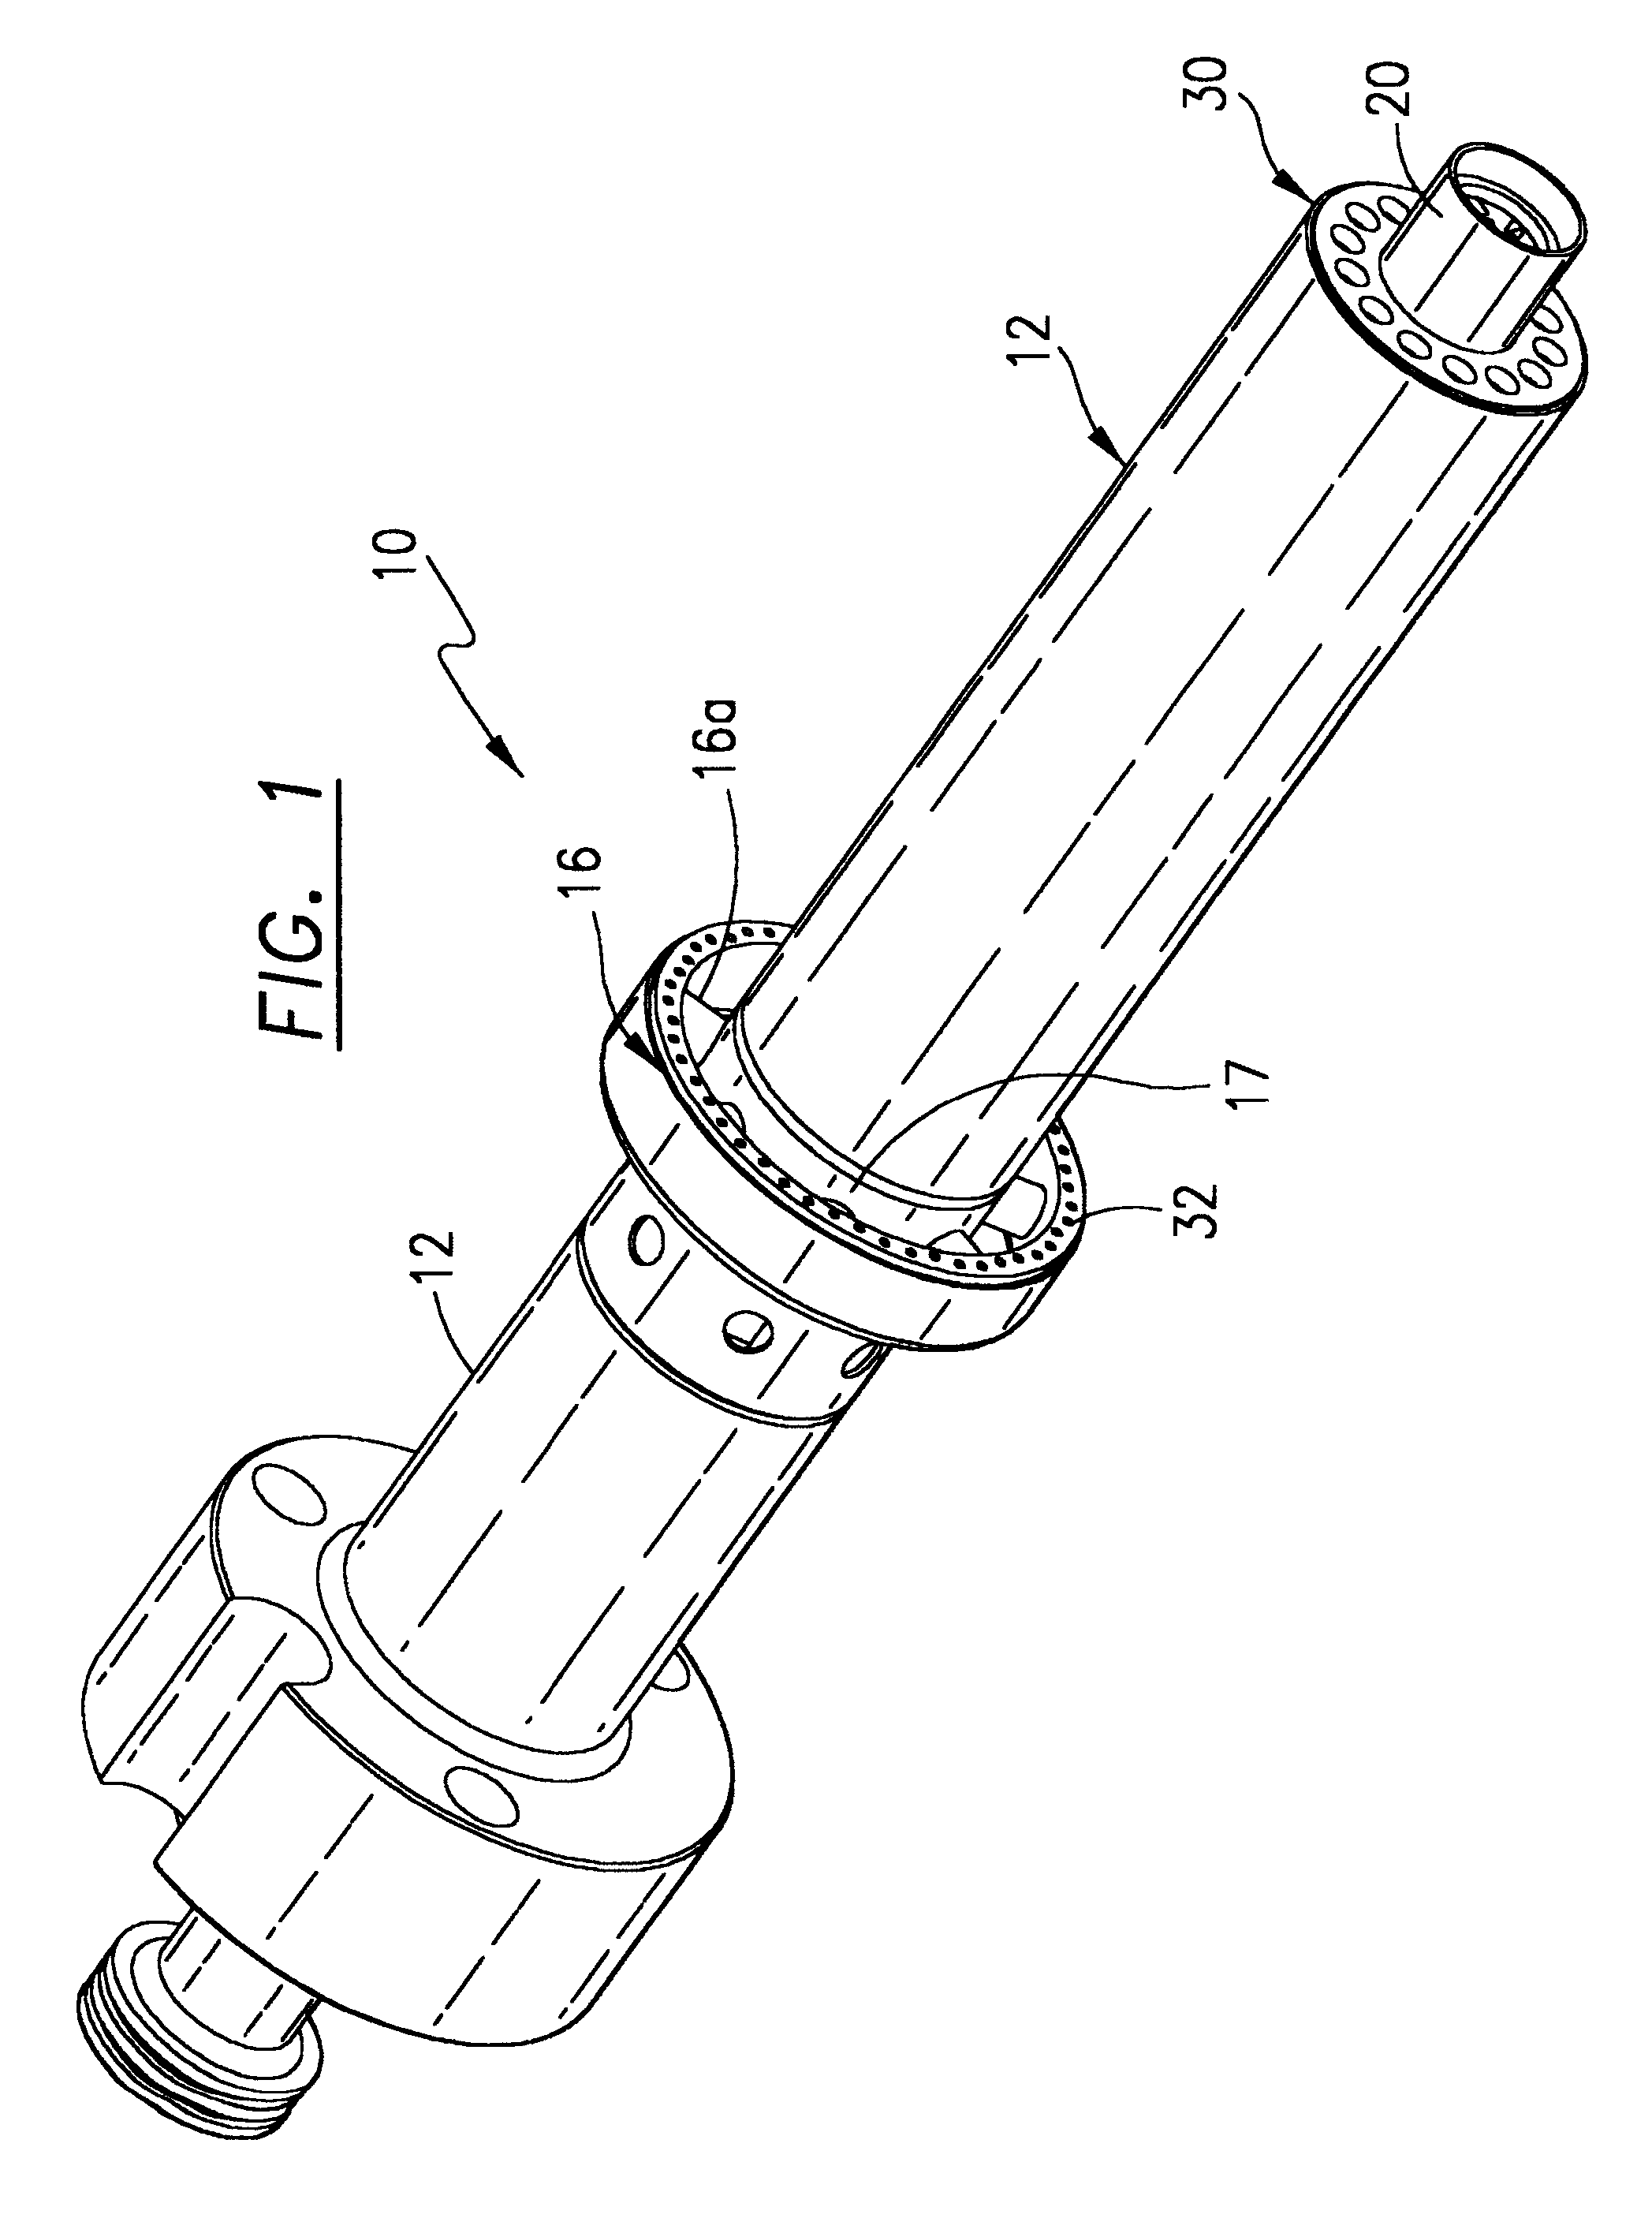 Full ring fuel distribution system for a gas turbine combustor